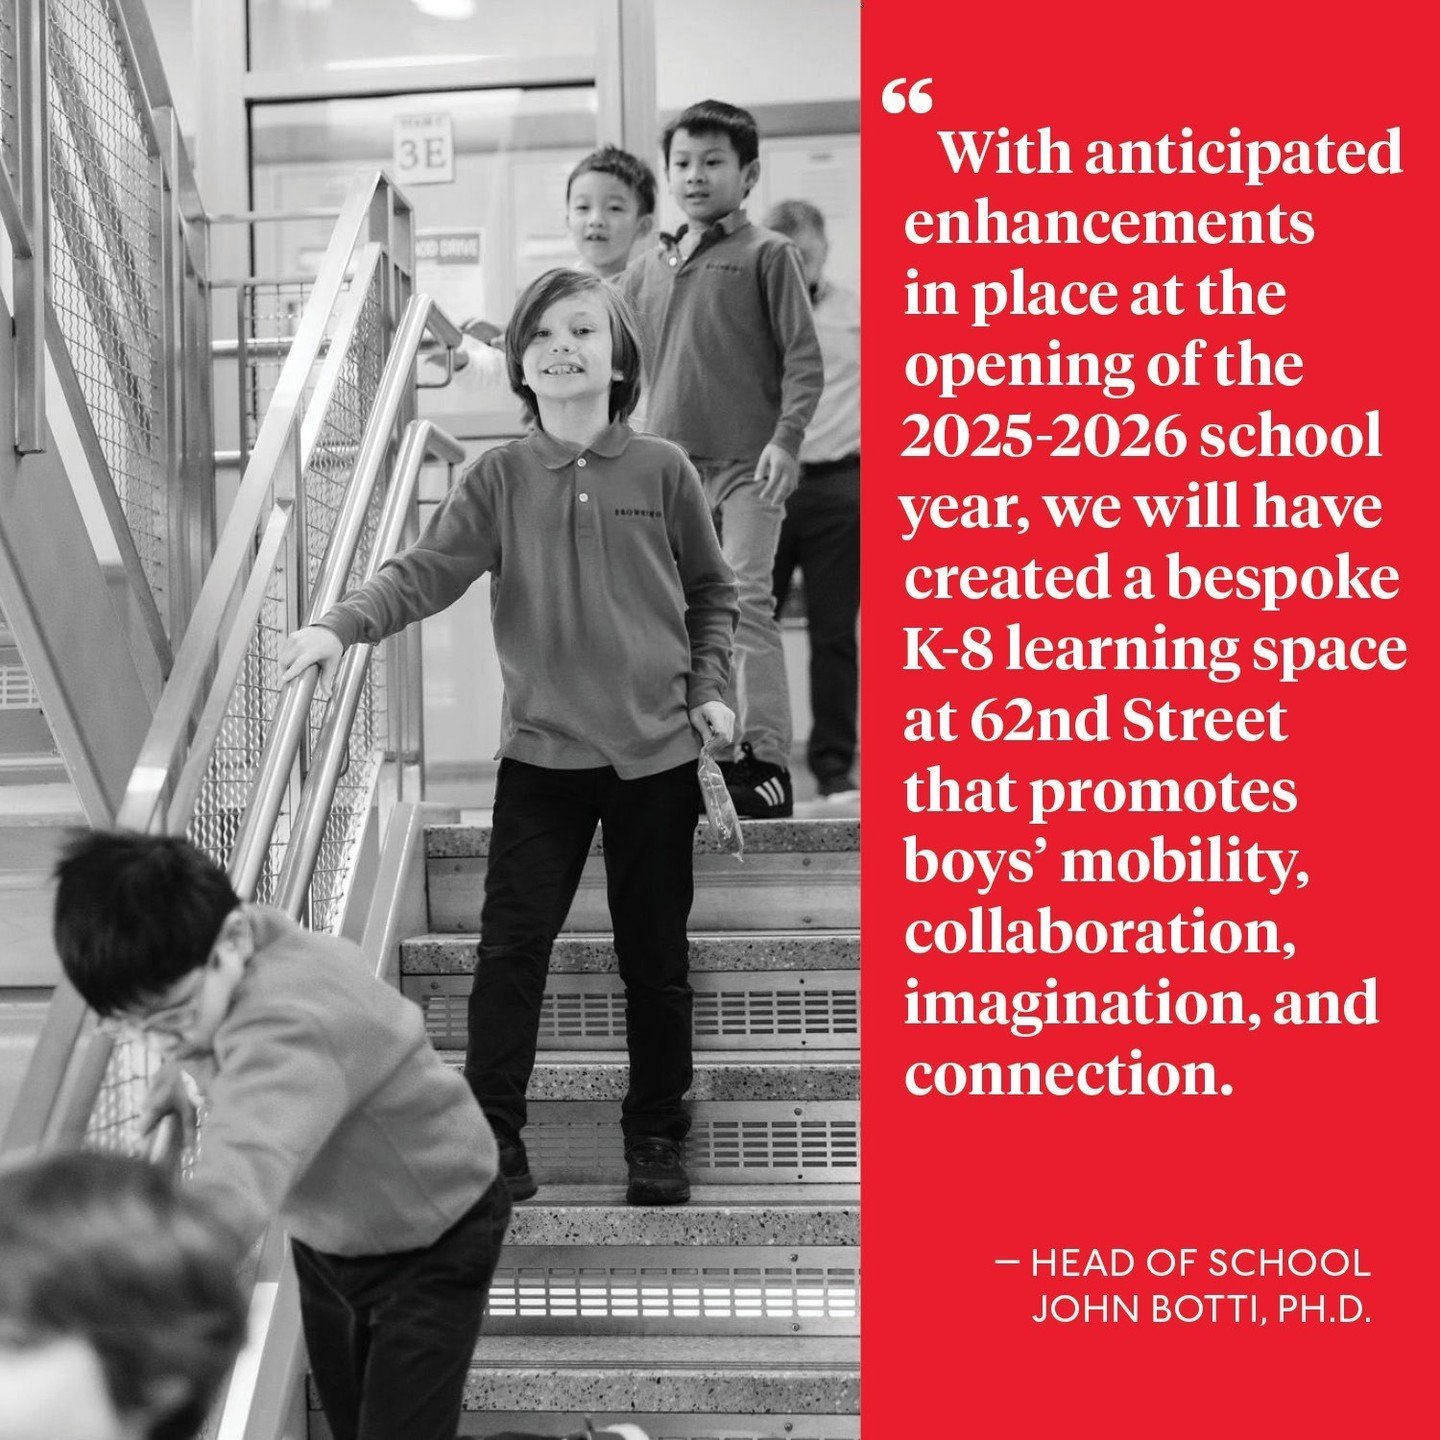 Dr. Botti on Enhancing Our 62nd Street Campus! ✍️⁠
⁠
As we await the new Upper School site, Dr. Botti discusses plans for the existing East 62nd Street campus, featuring expanded facilities and refreshed spaces for our K-8 students.⁠
⁠
Read Dr. Botti